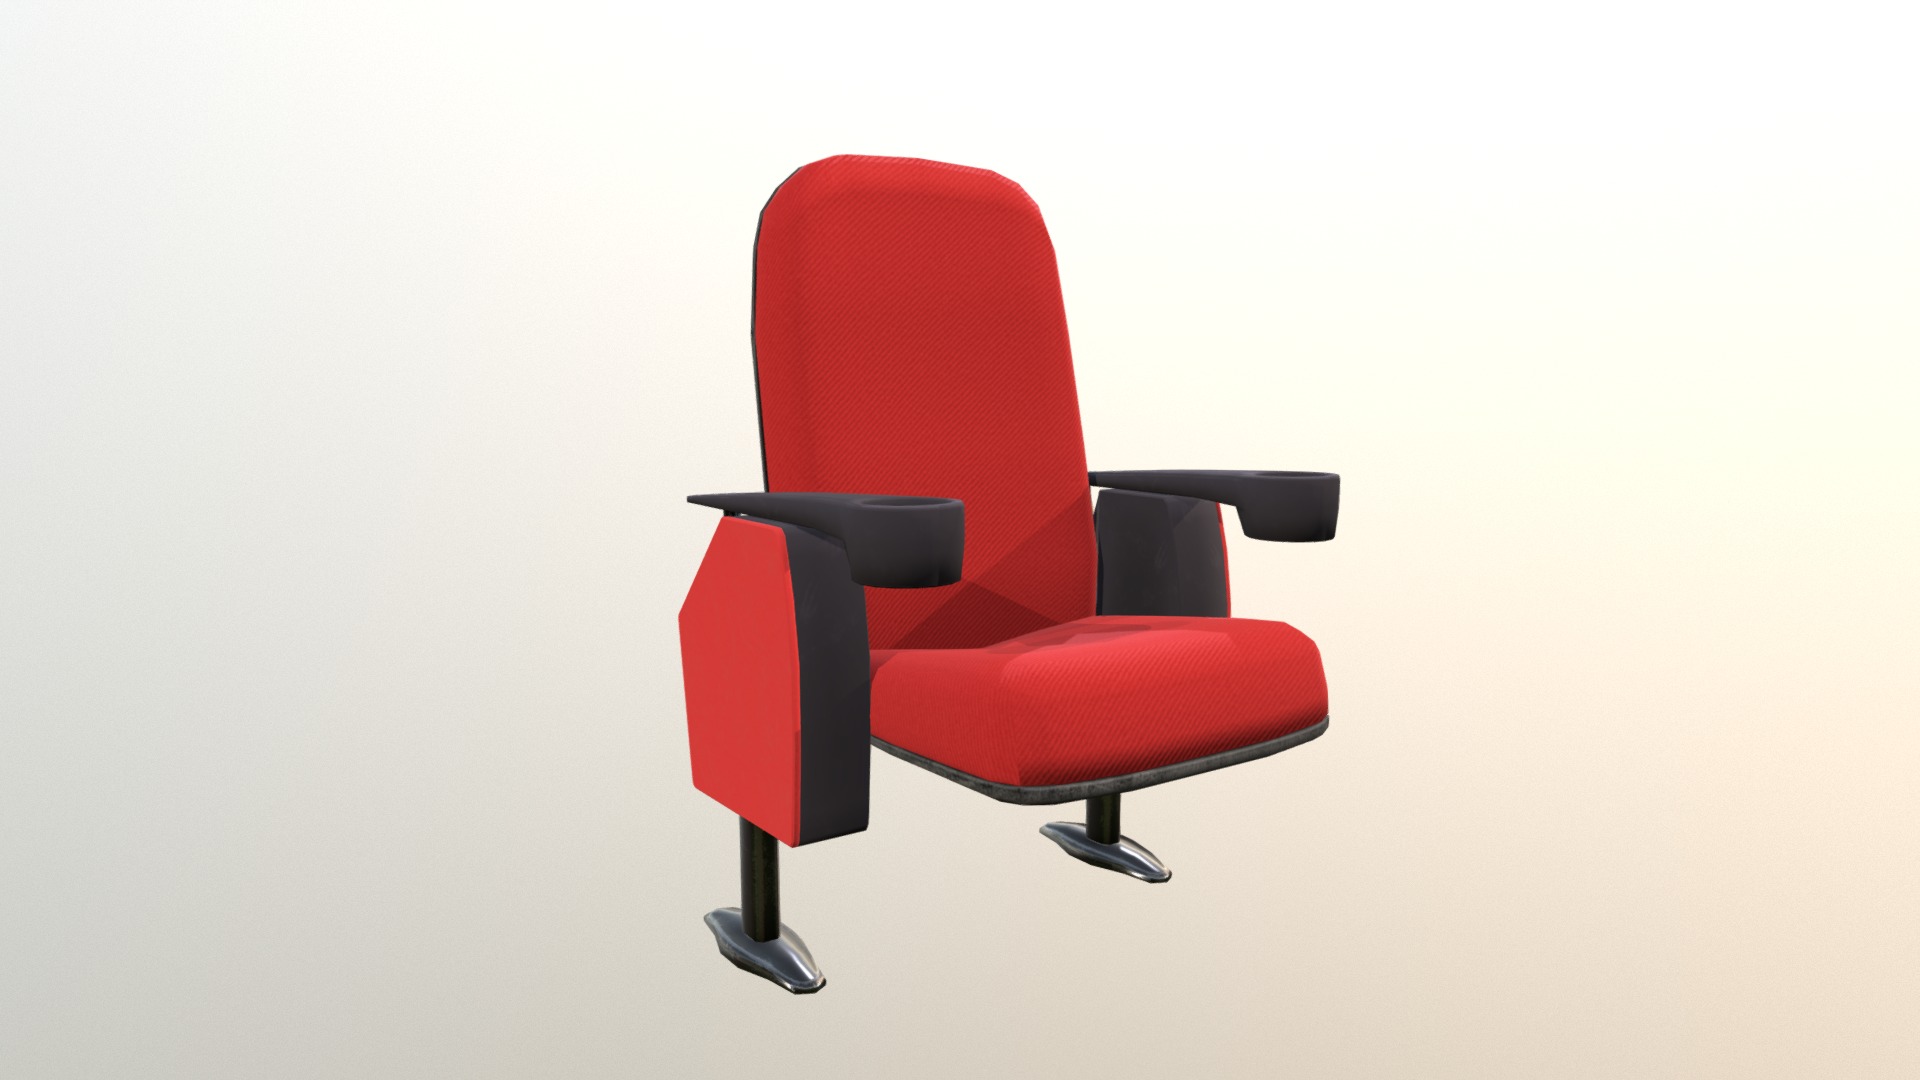 3D model Chair - This is a 3D model of the Chair. The 3D model is about a red chair with a black arm rest.